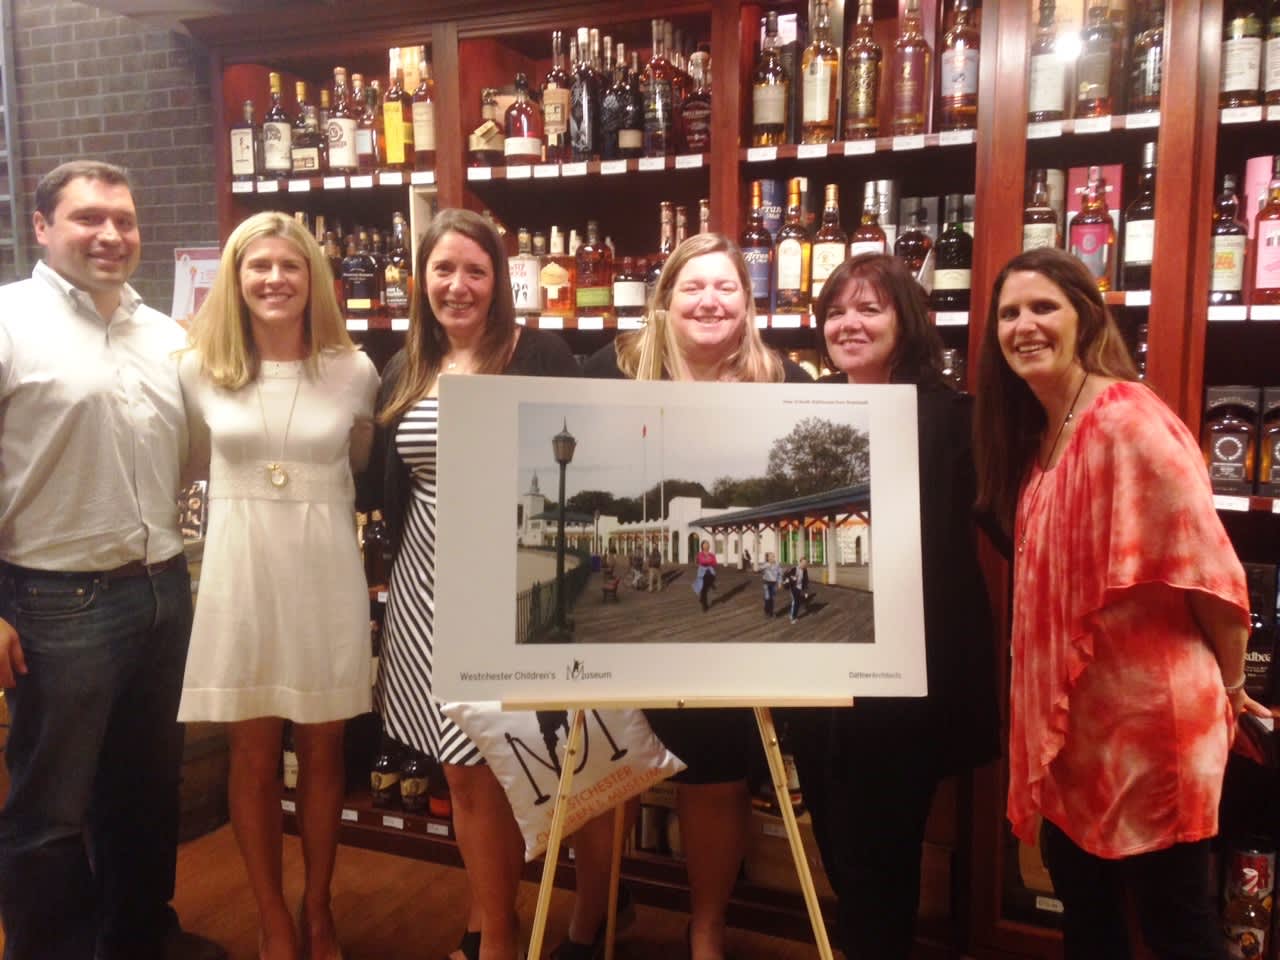 From left to right: Anthony D'Arpino, Carly D'Arpino, Francesca Vitti, Maggie O'Hara, Heather Waters and Carolyn Spencer at the Harrison Wine Vault's recent fundraising event.